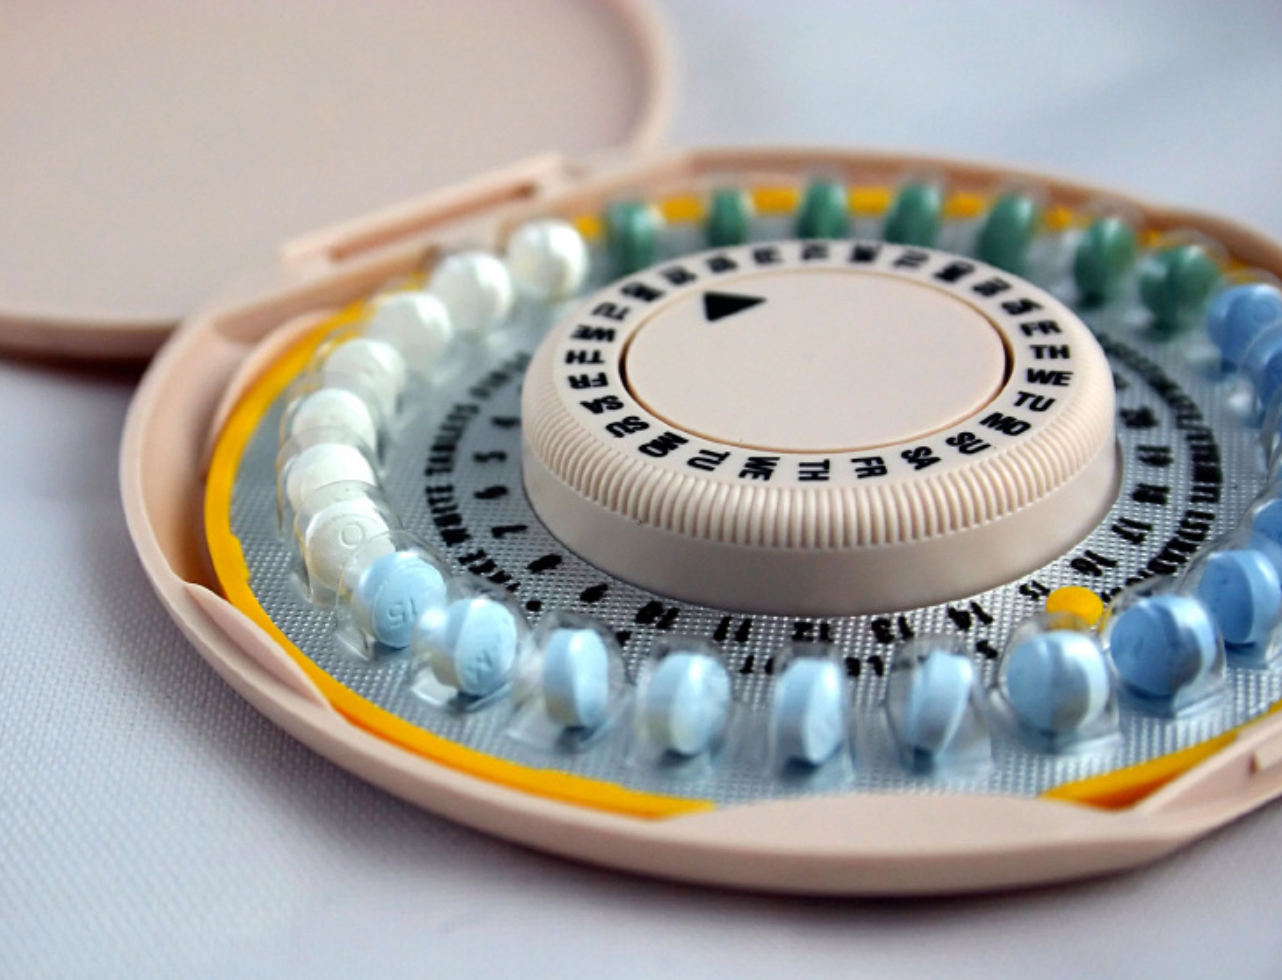 ASHP Studies Find Patients Welcome Hormonal Birth Control Access from Pharmacists